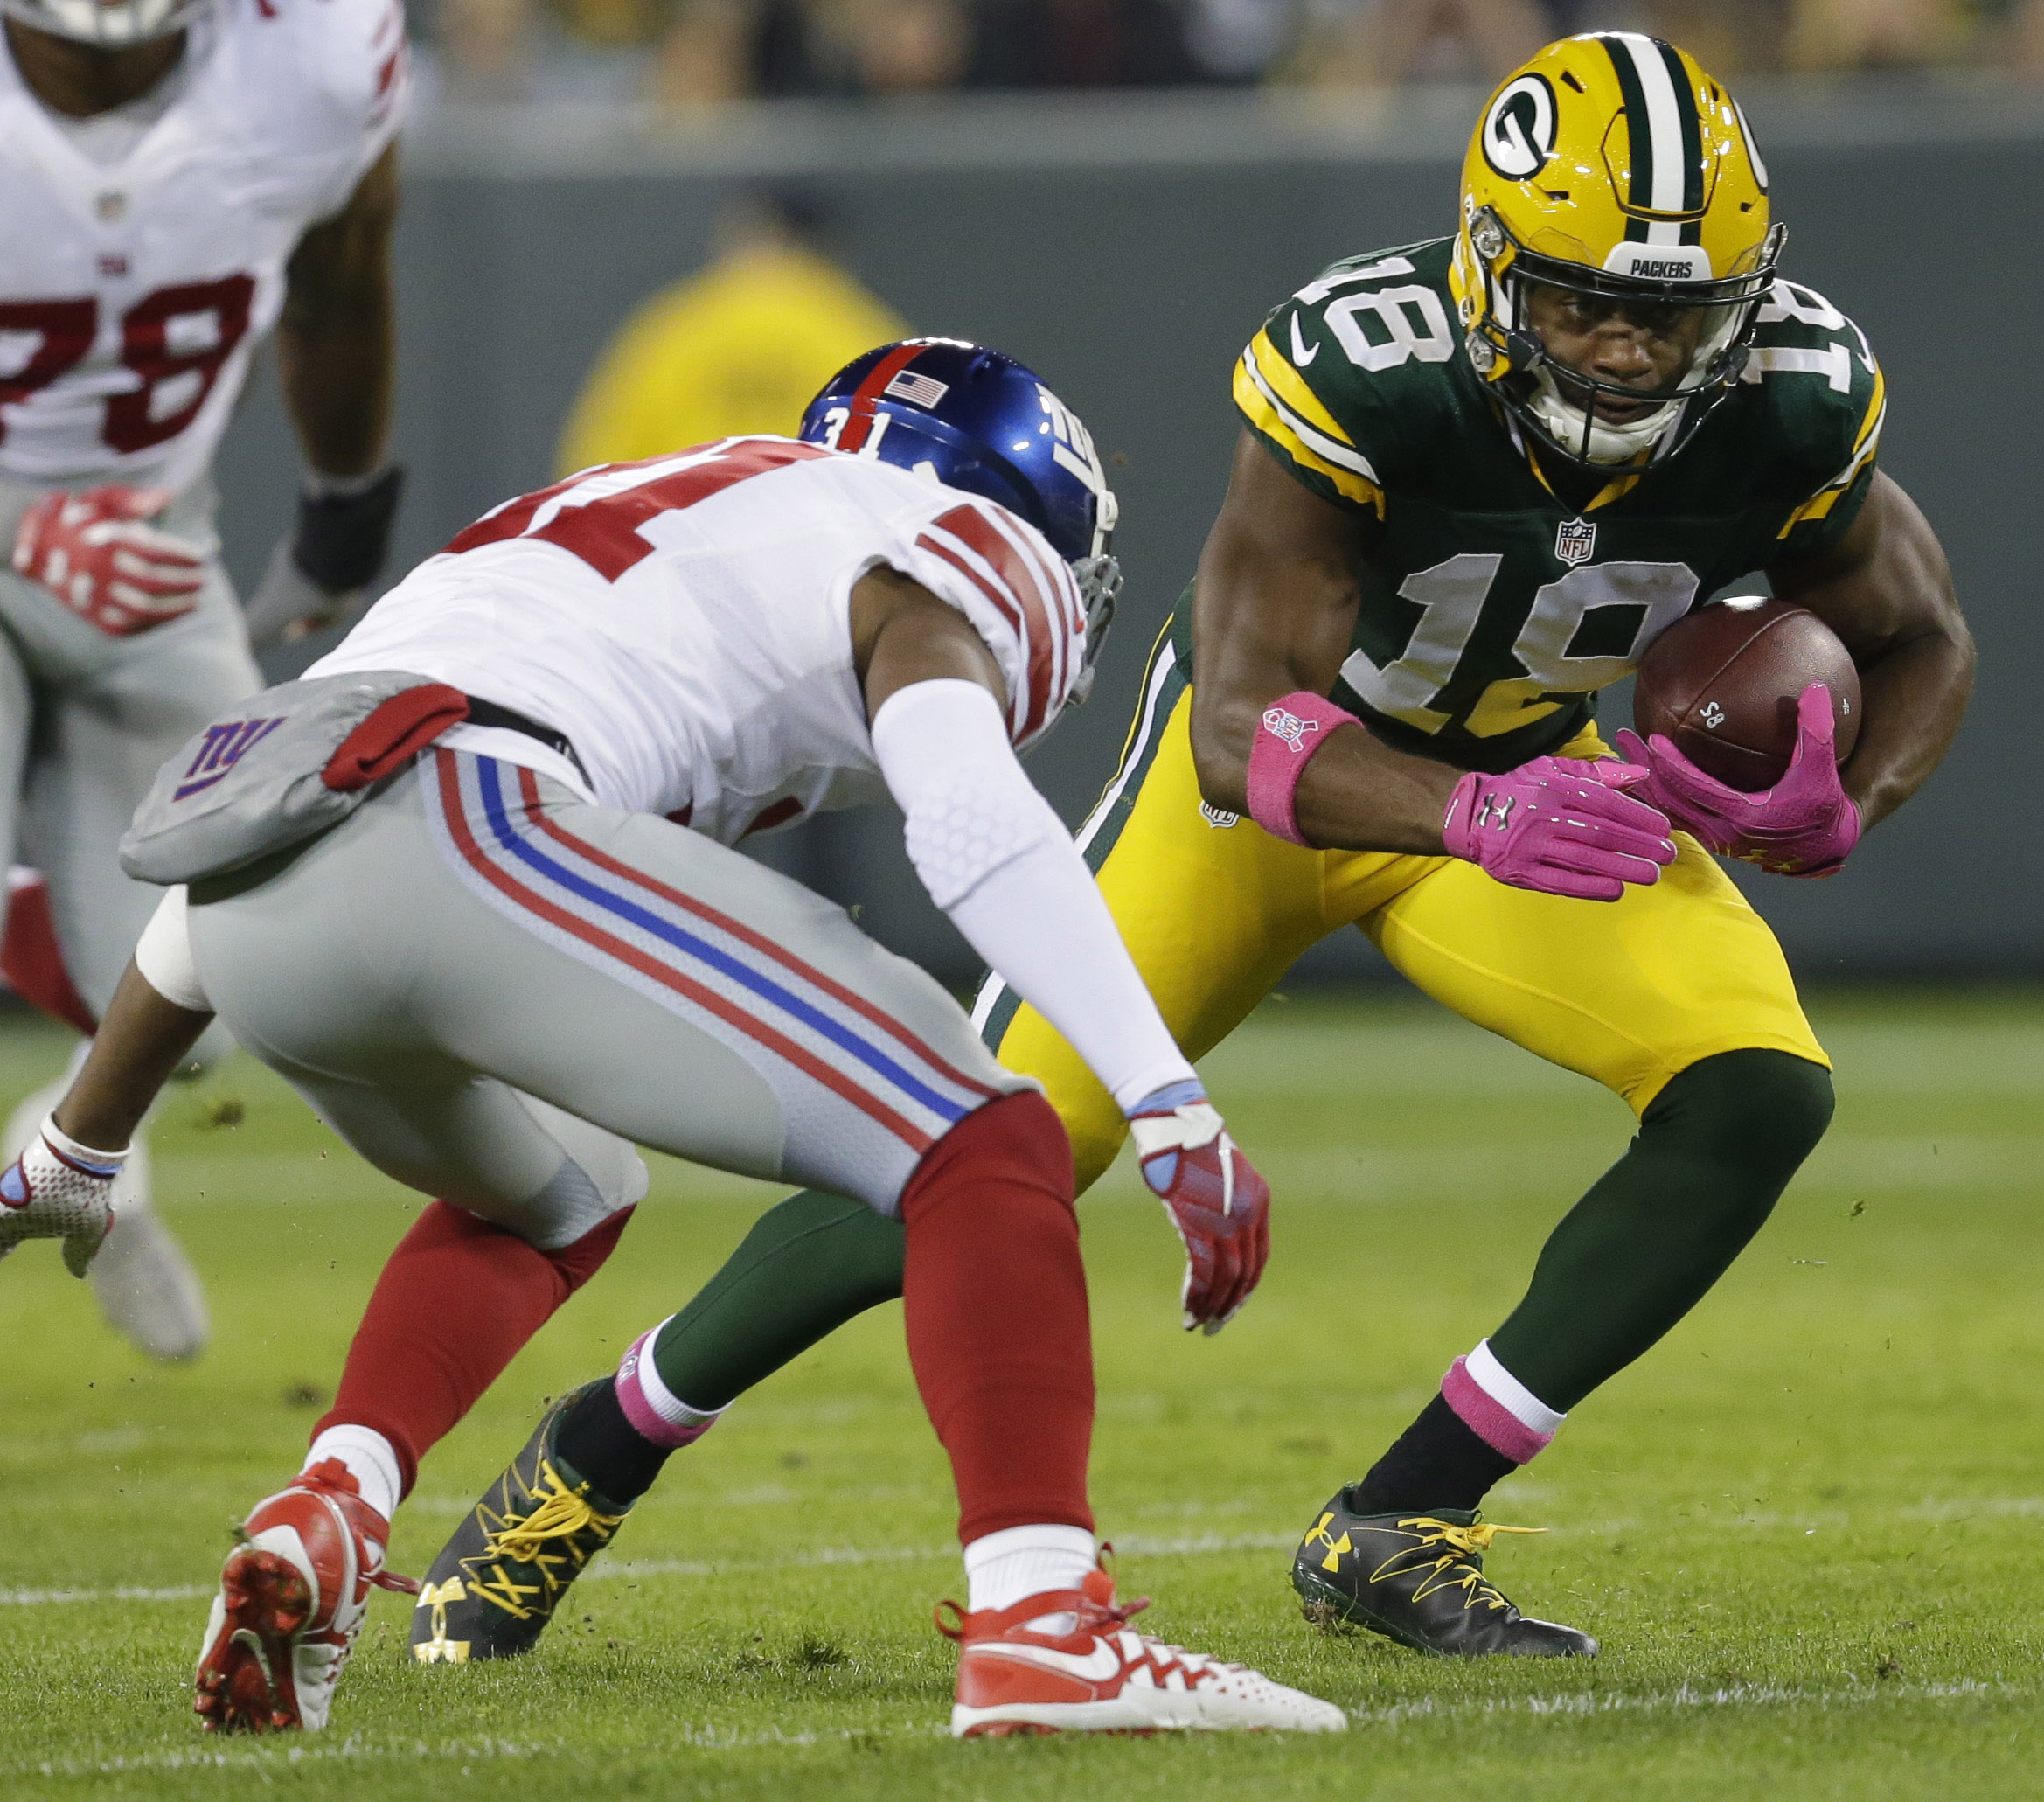 NFL: New York Giants at Green Bay Packers